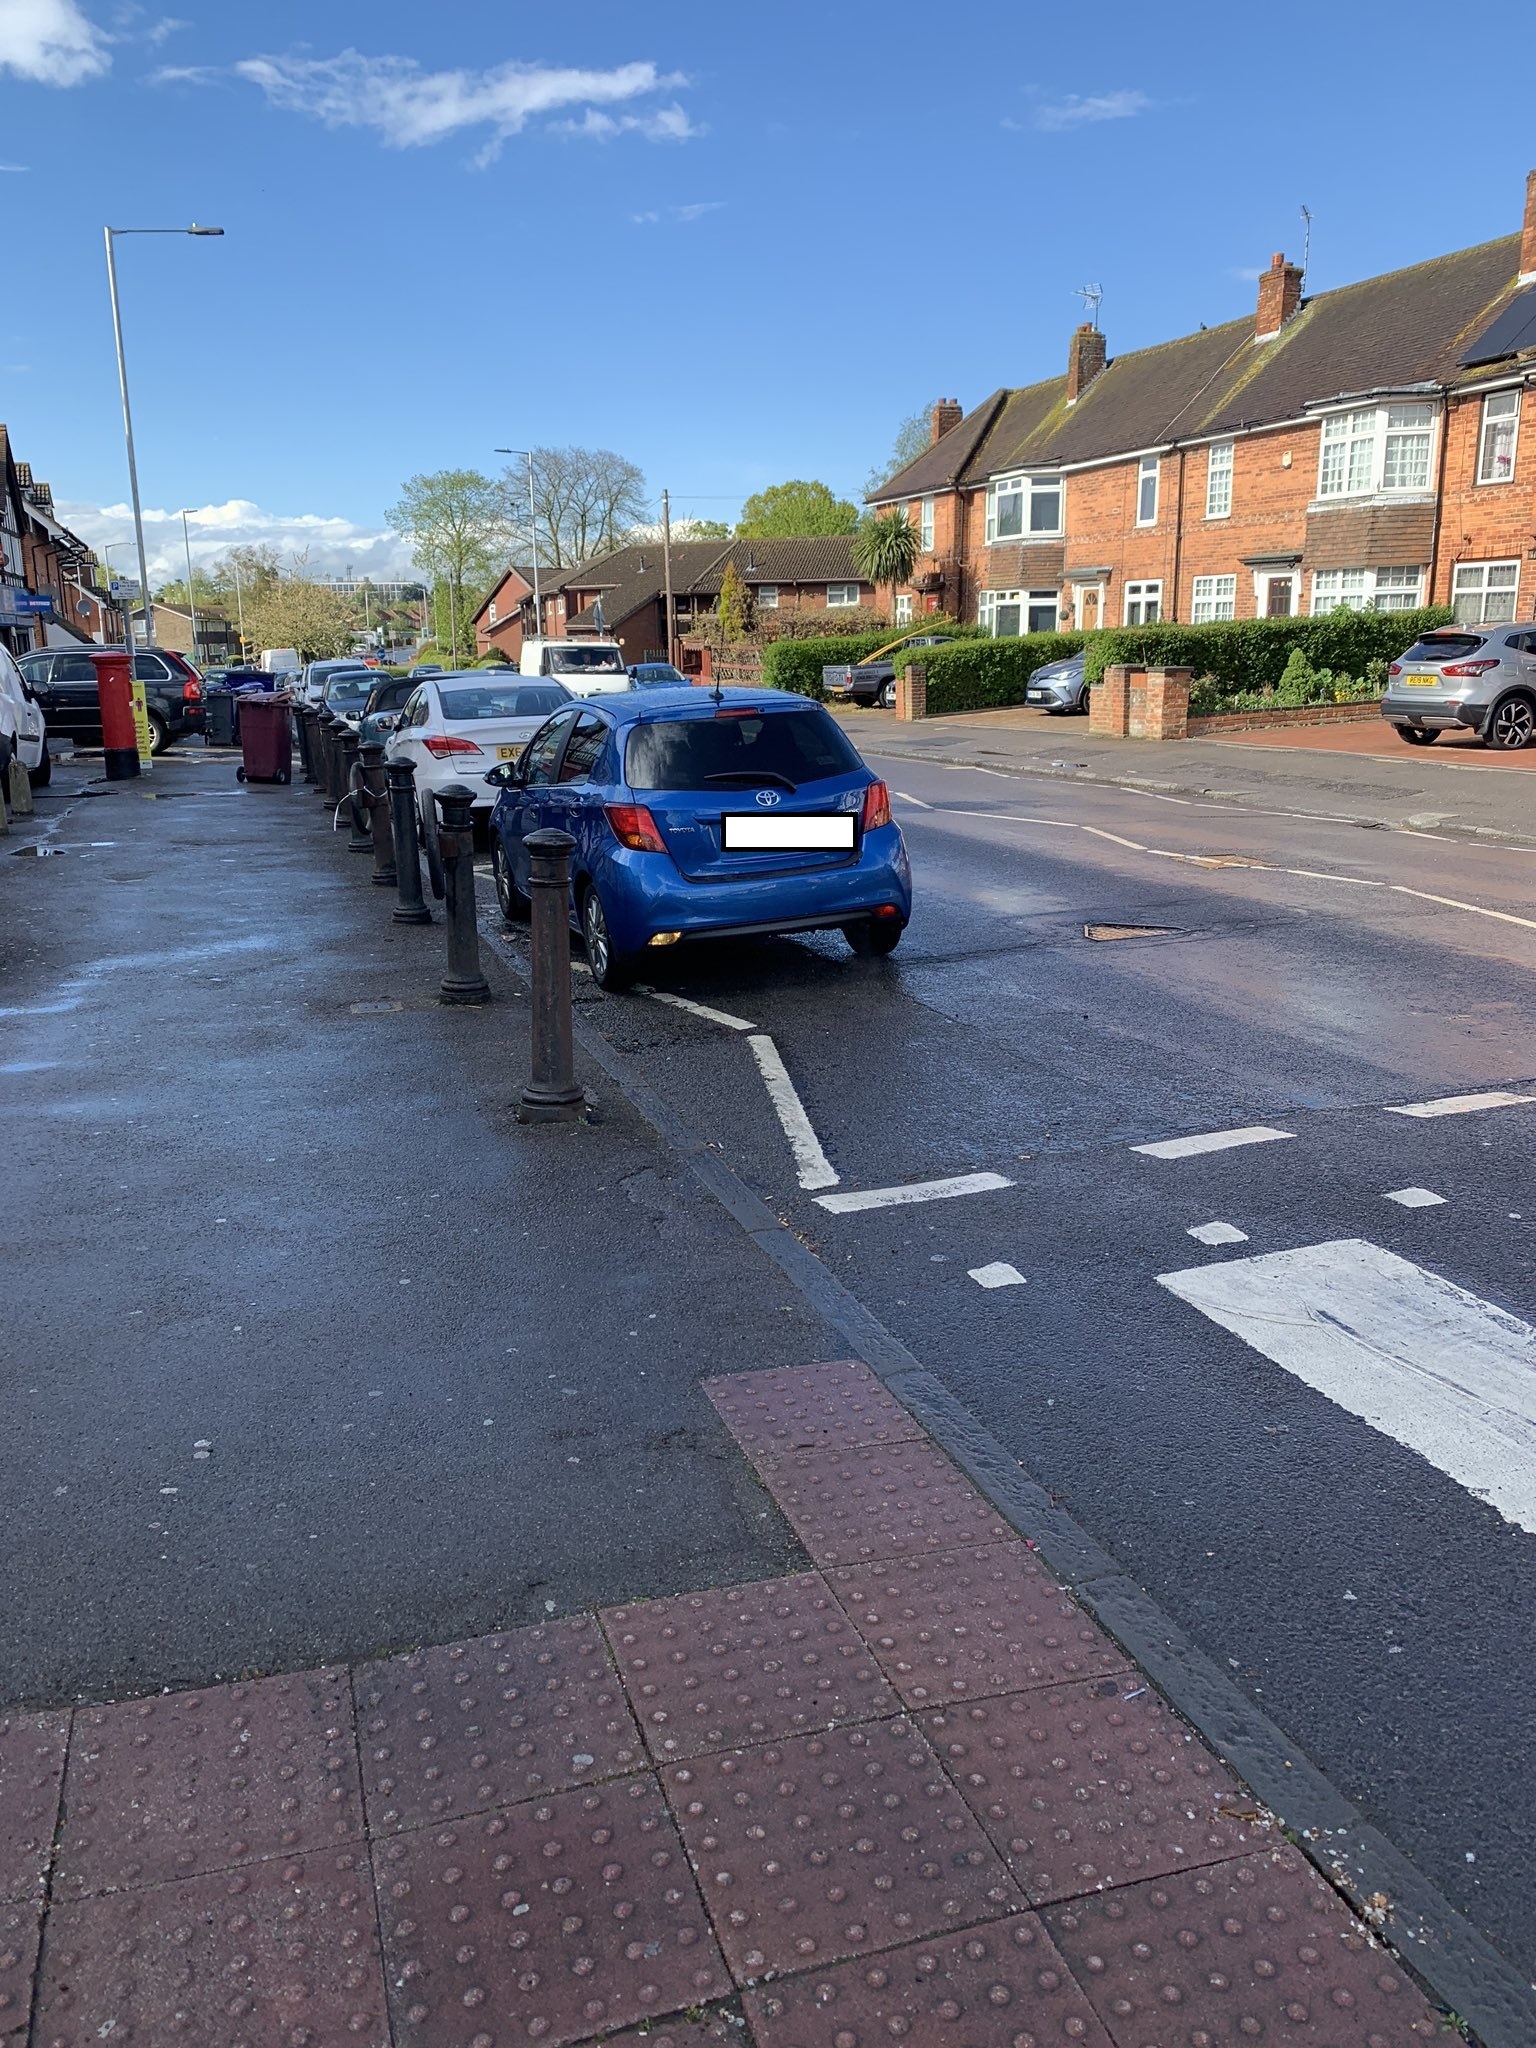 Cars parked illegally in Reading. Images via Oli Butler